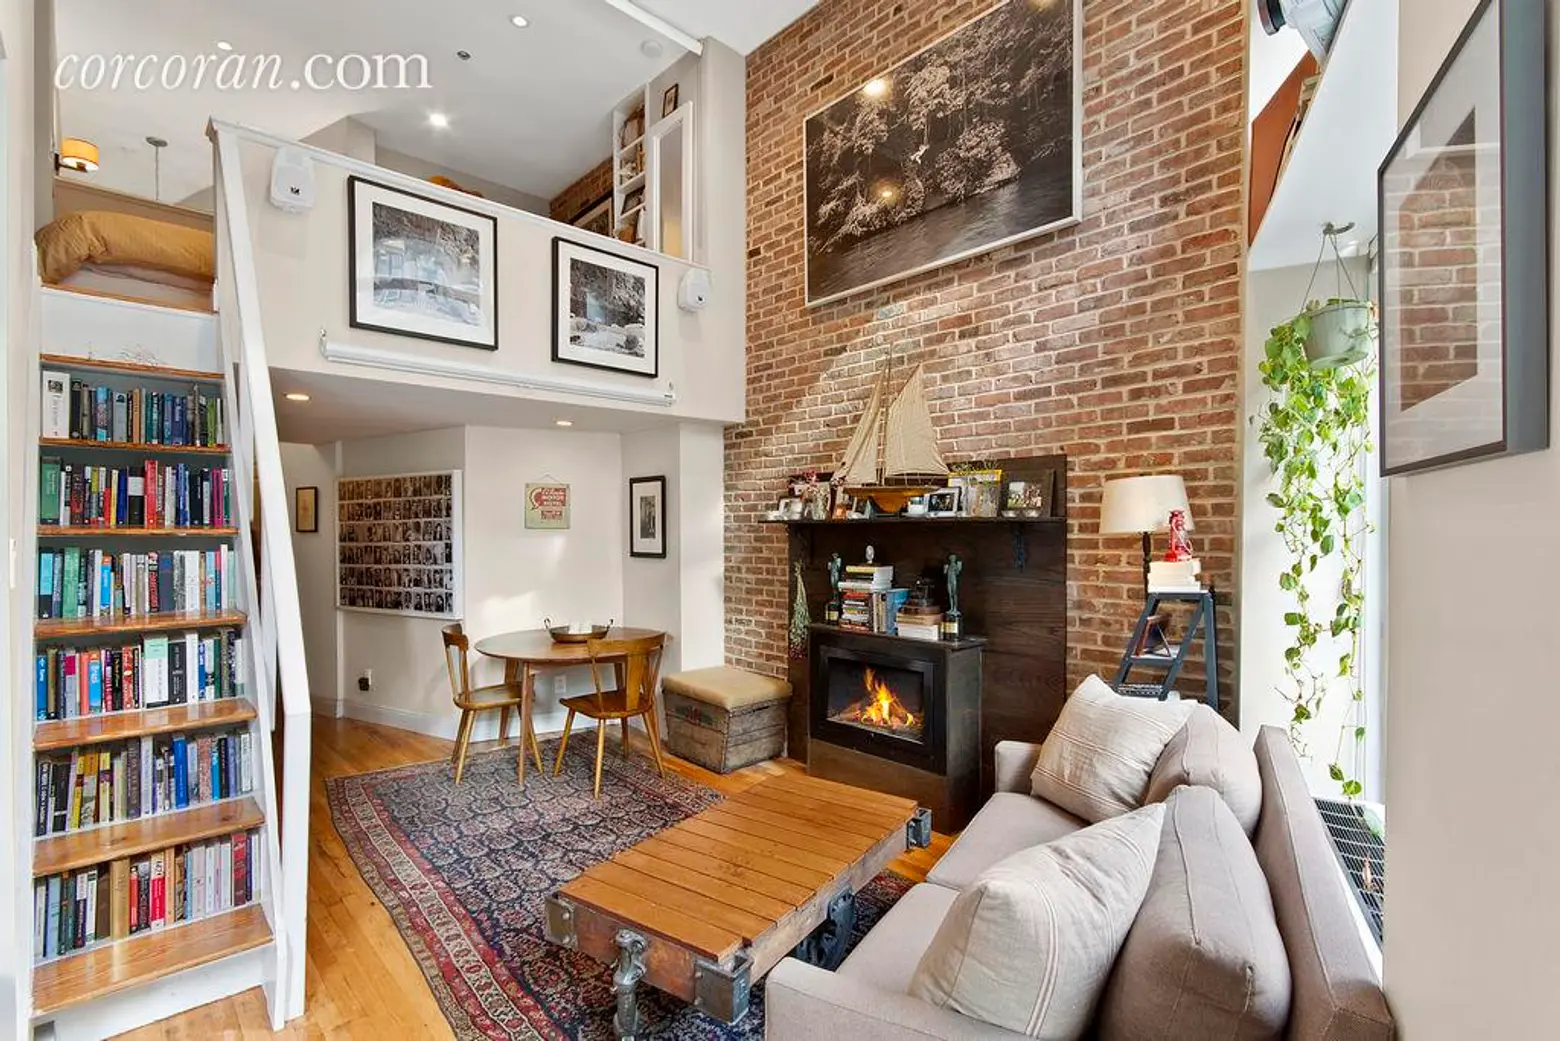 ‘Veronica Mars’ Actor Lists Village Loft Featuring Cast Iron Columns and Double Height Ceilings